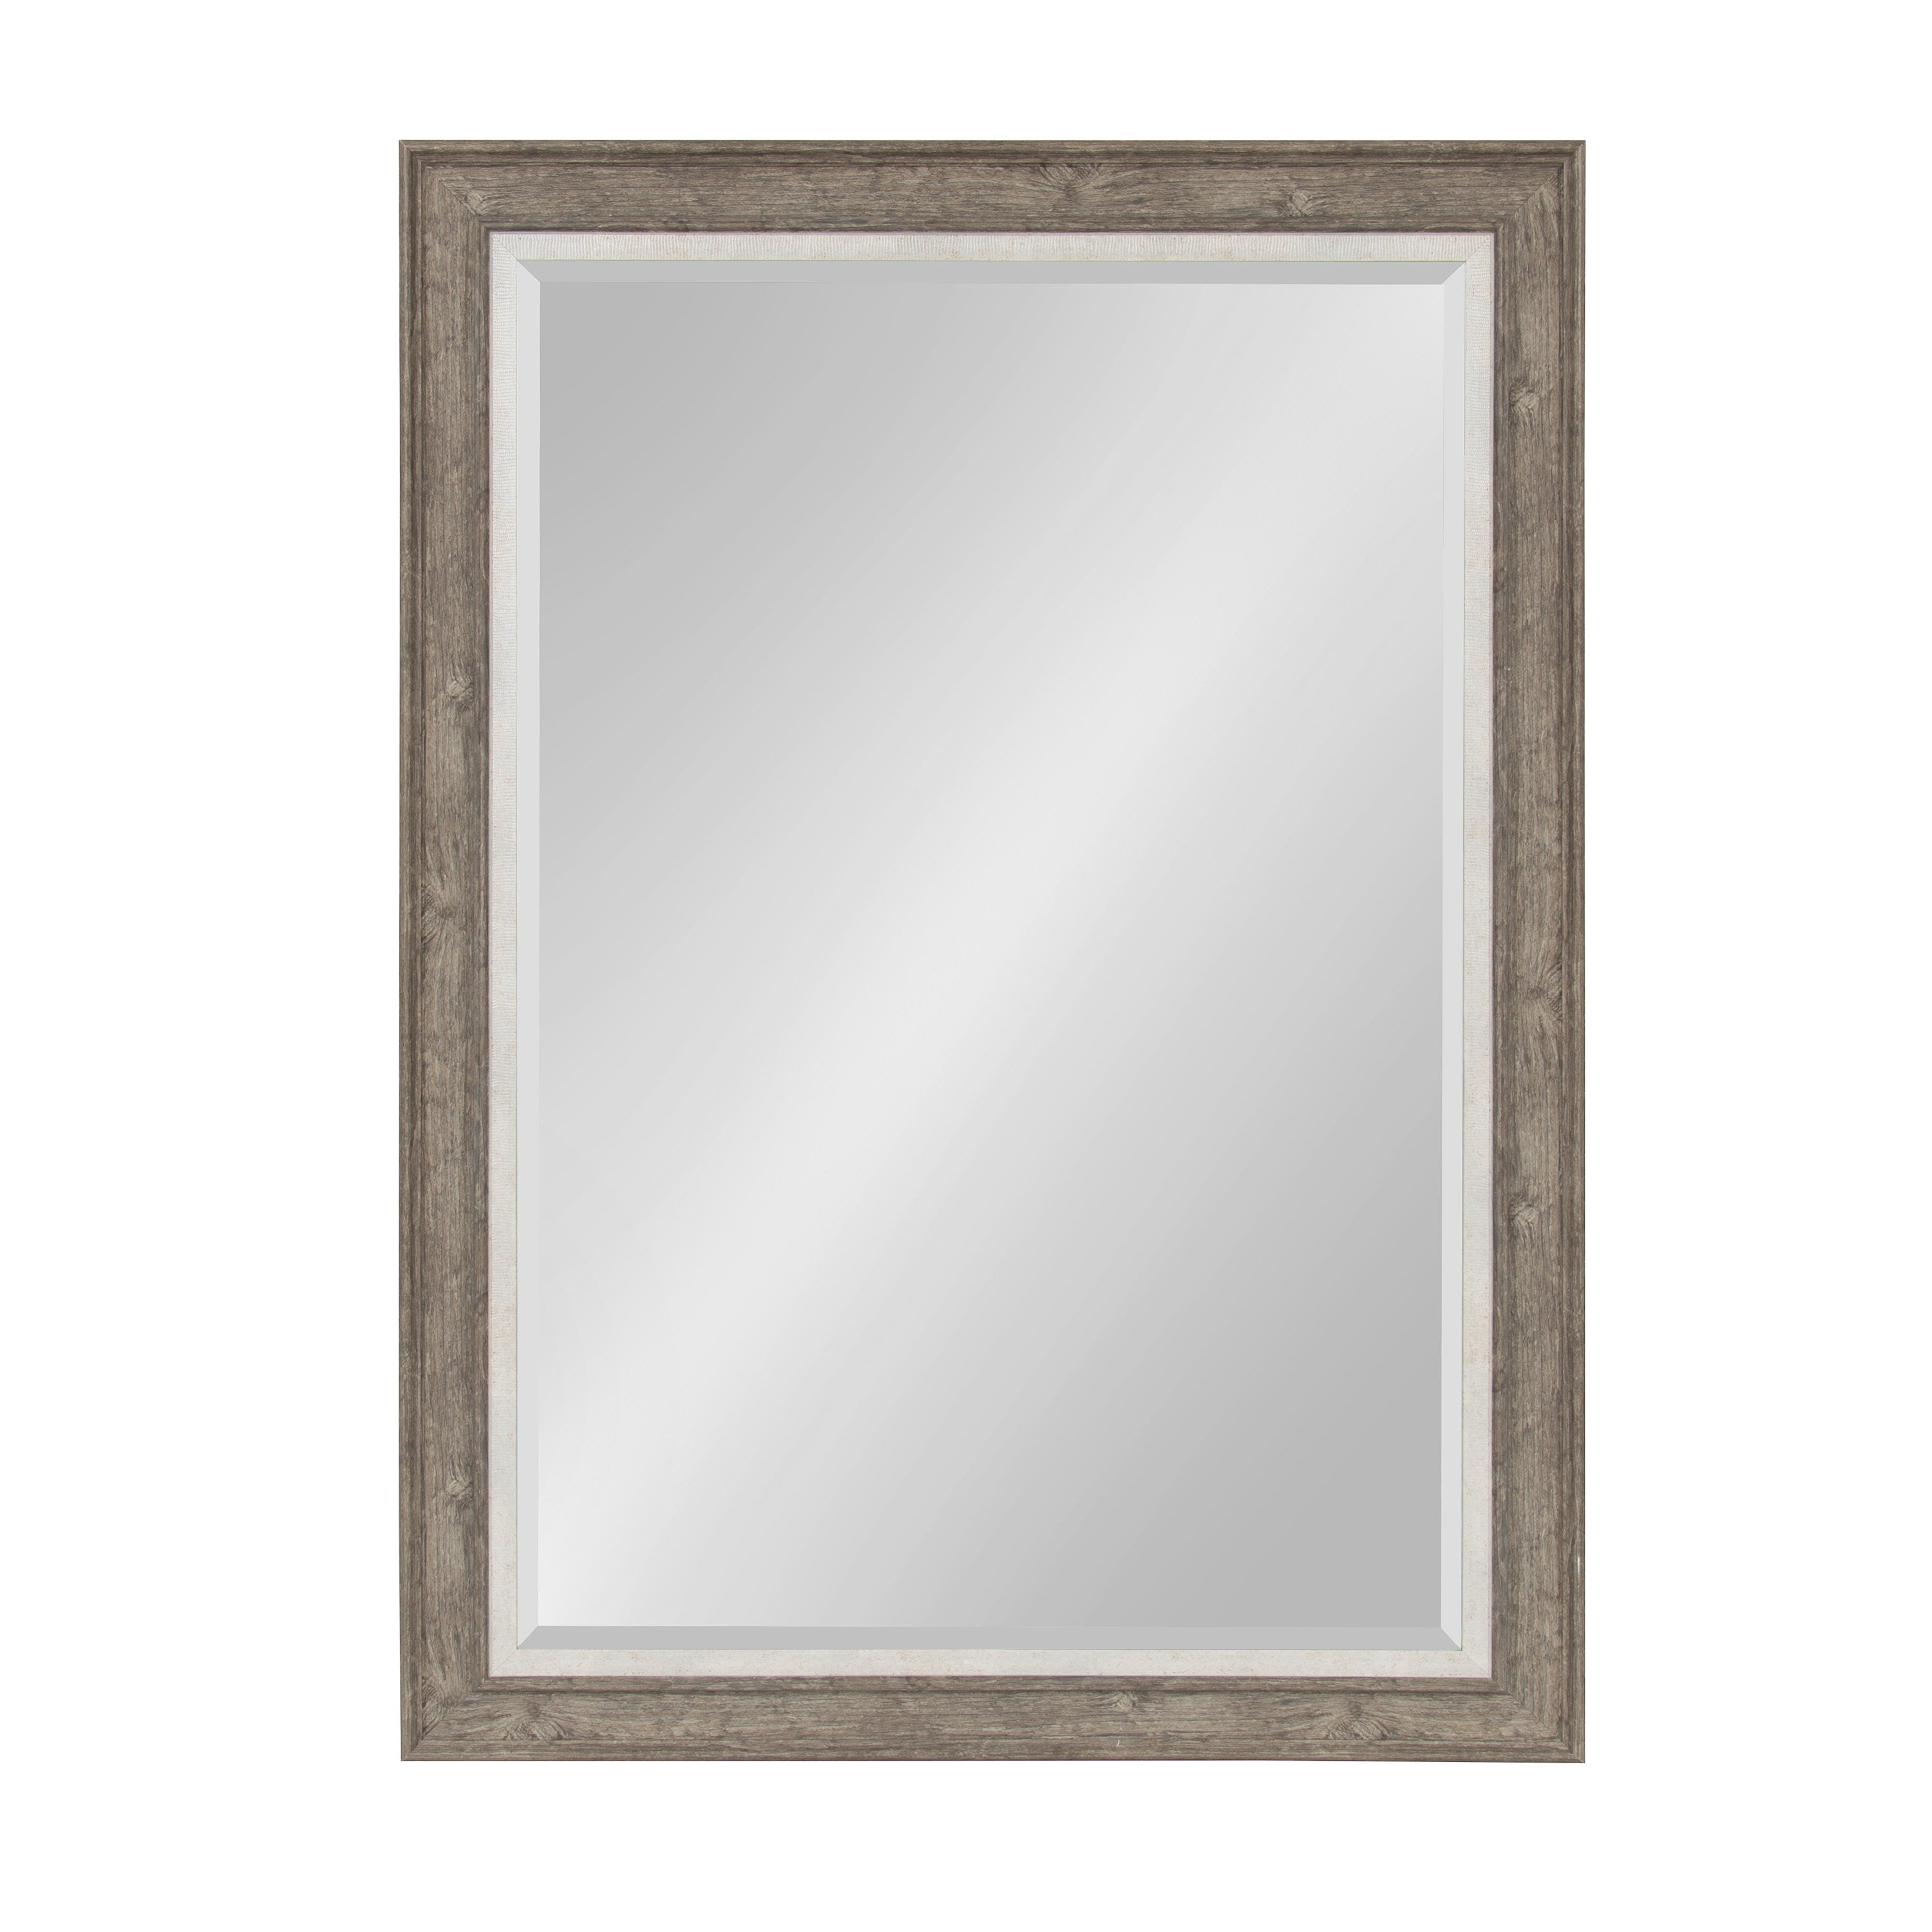 Woodway Framed Wall Mirror